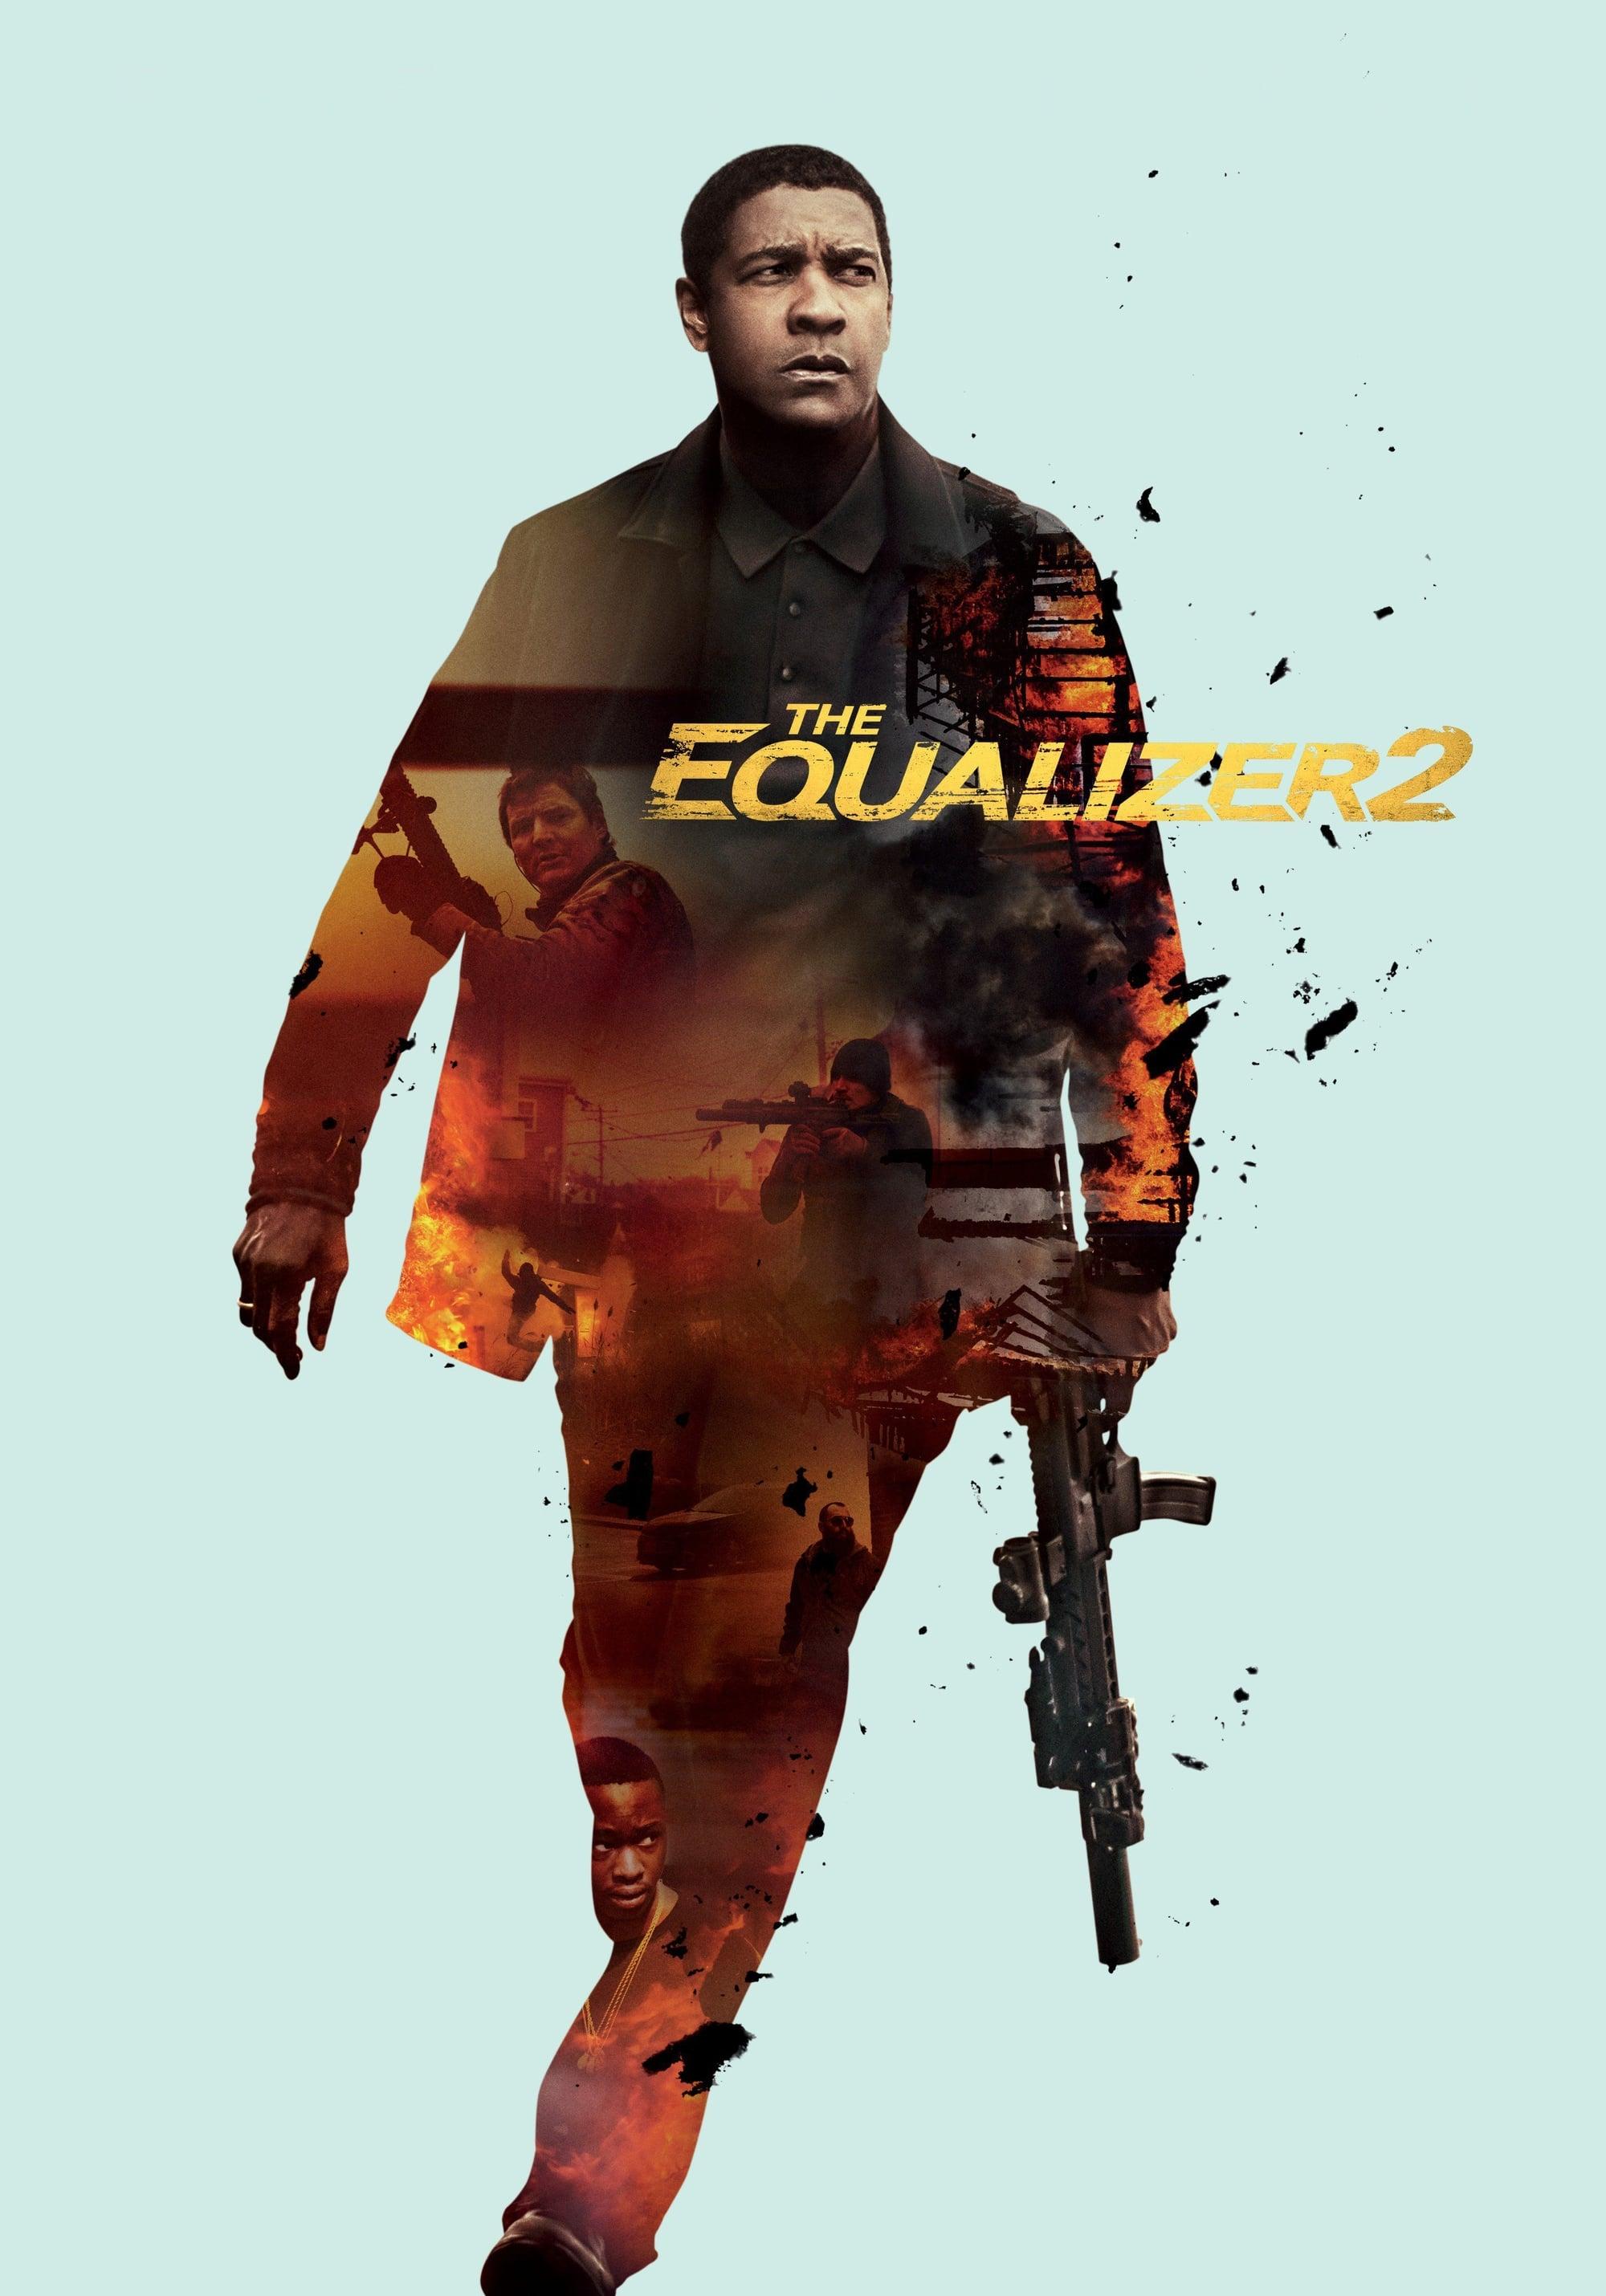 The Equalizer 2 poster